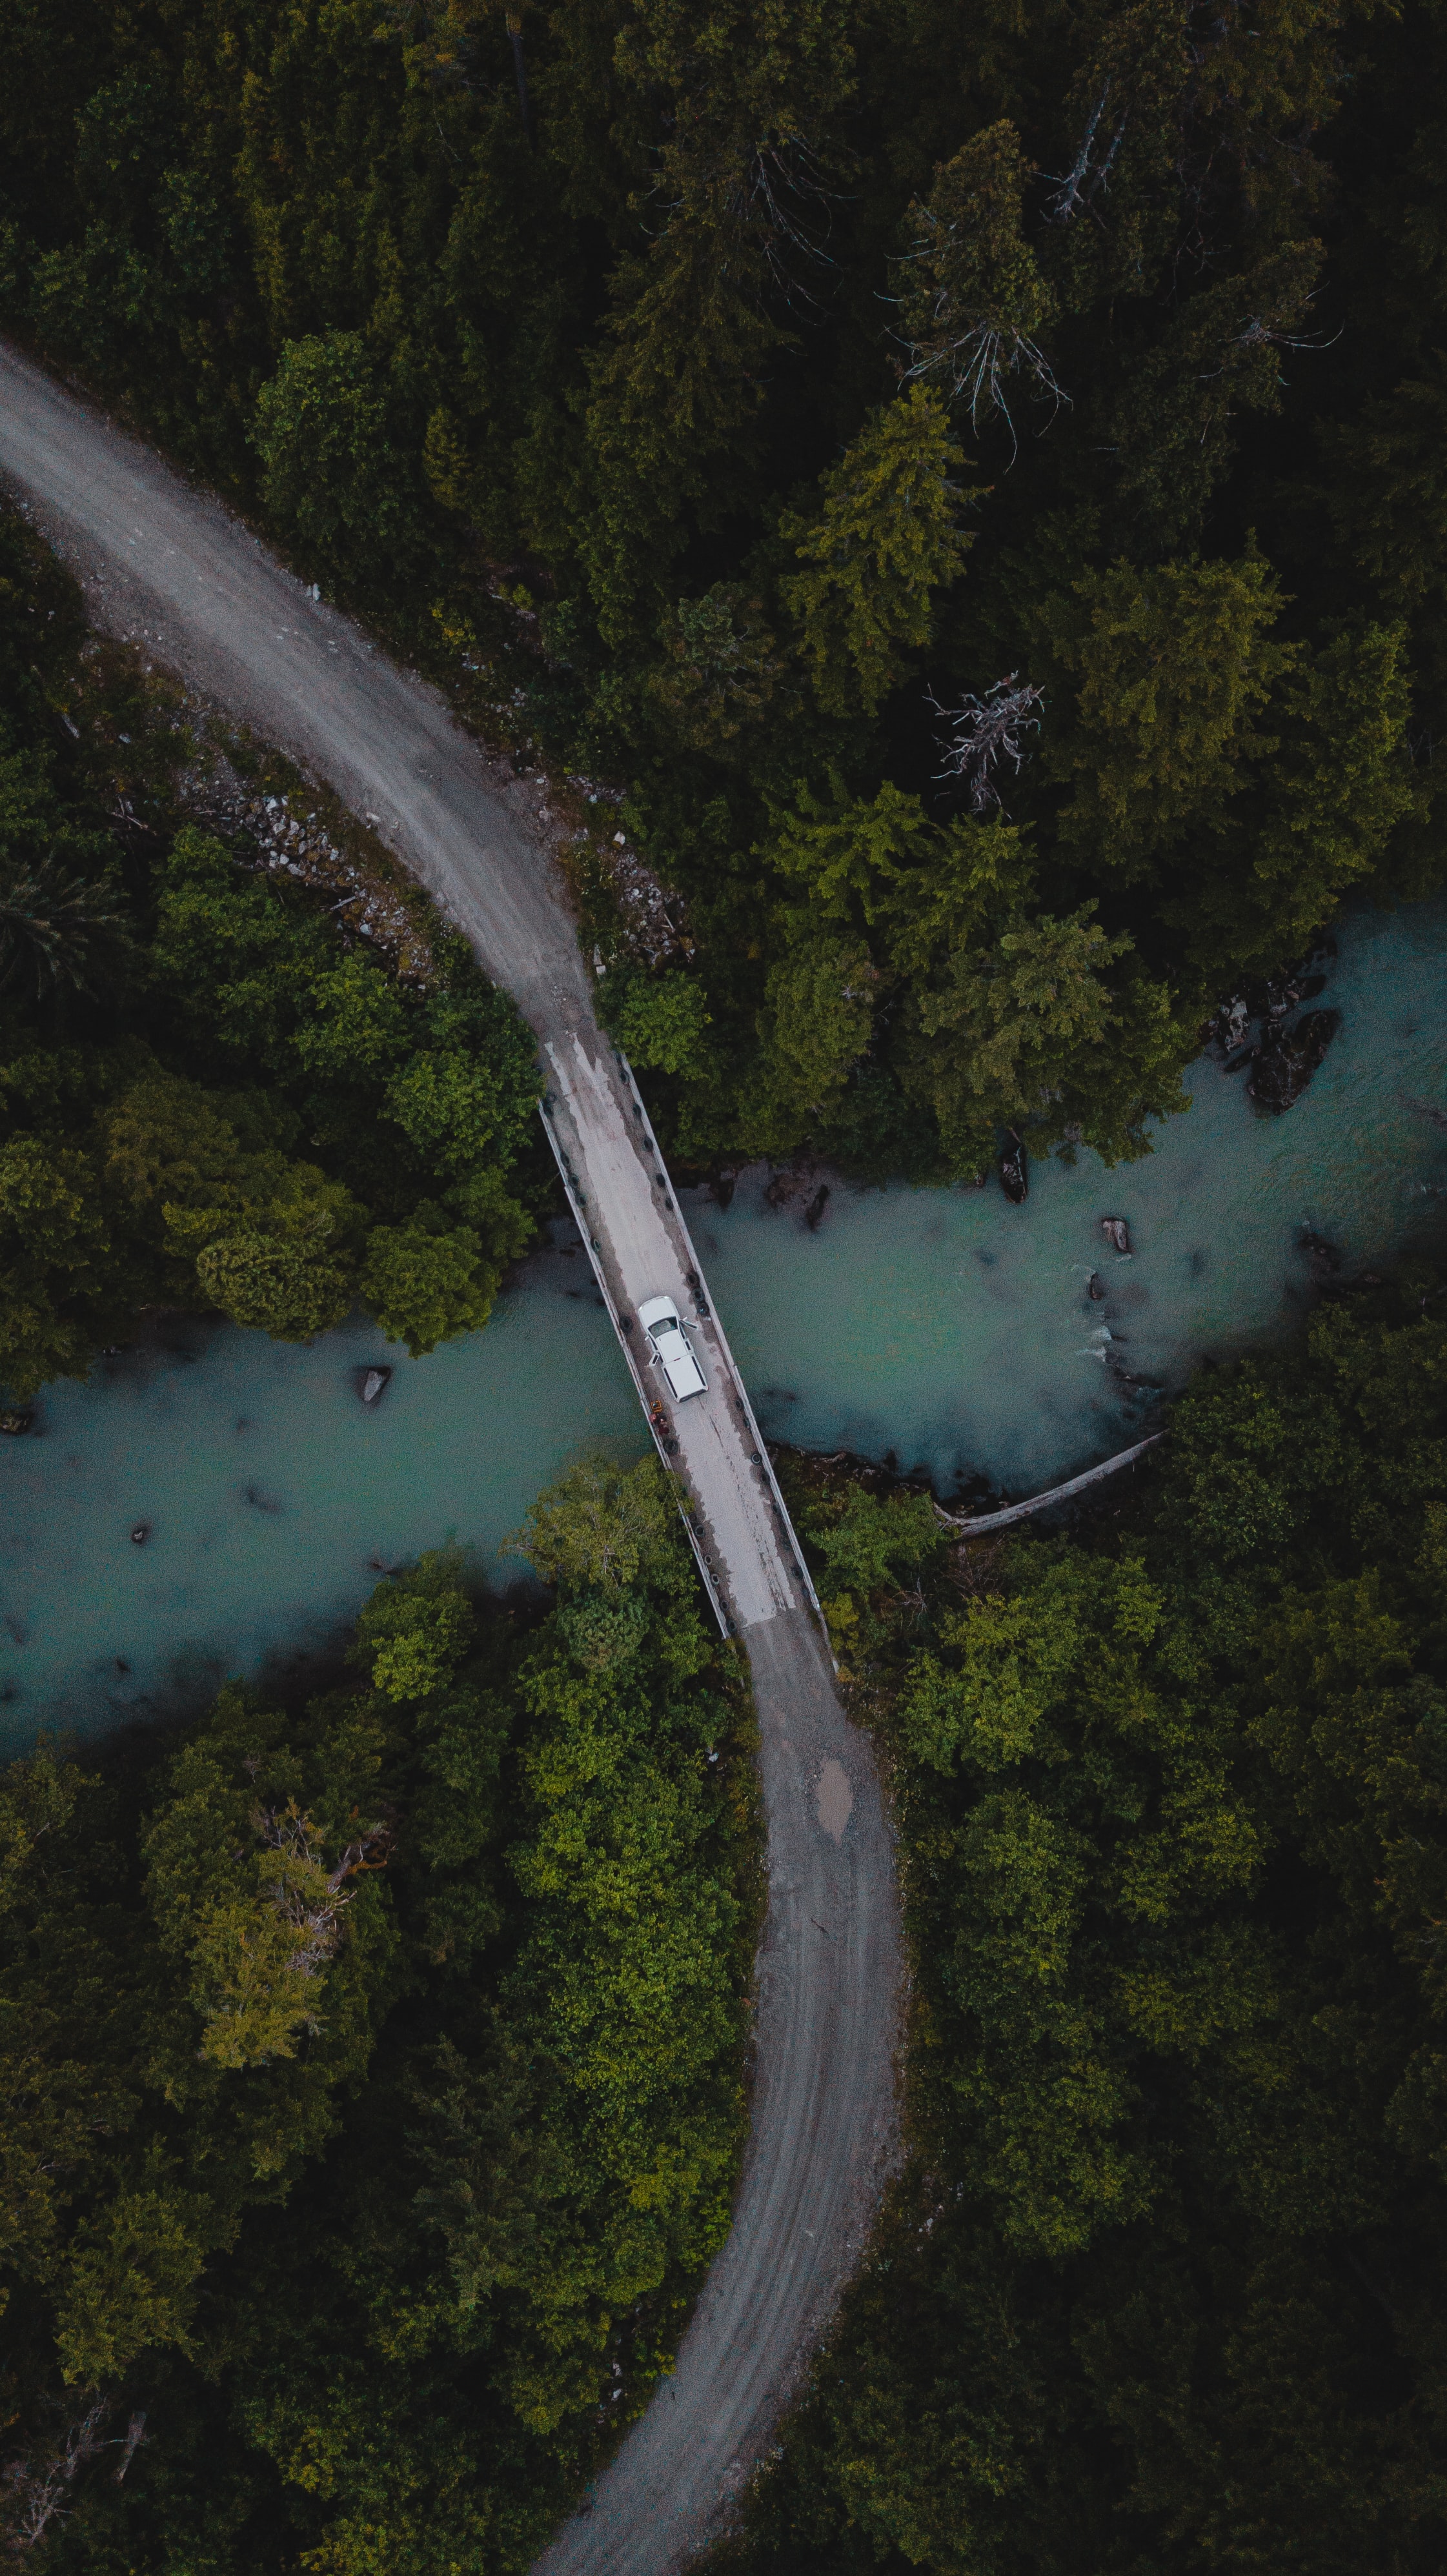 Horizontal Wallpaper rivers, nature, trees, view from above, forest, car, machine, bridge